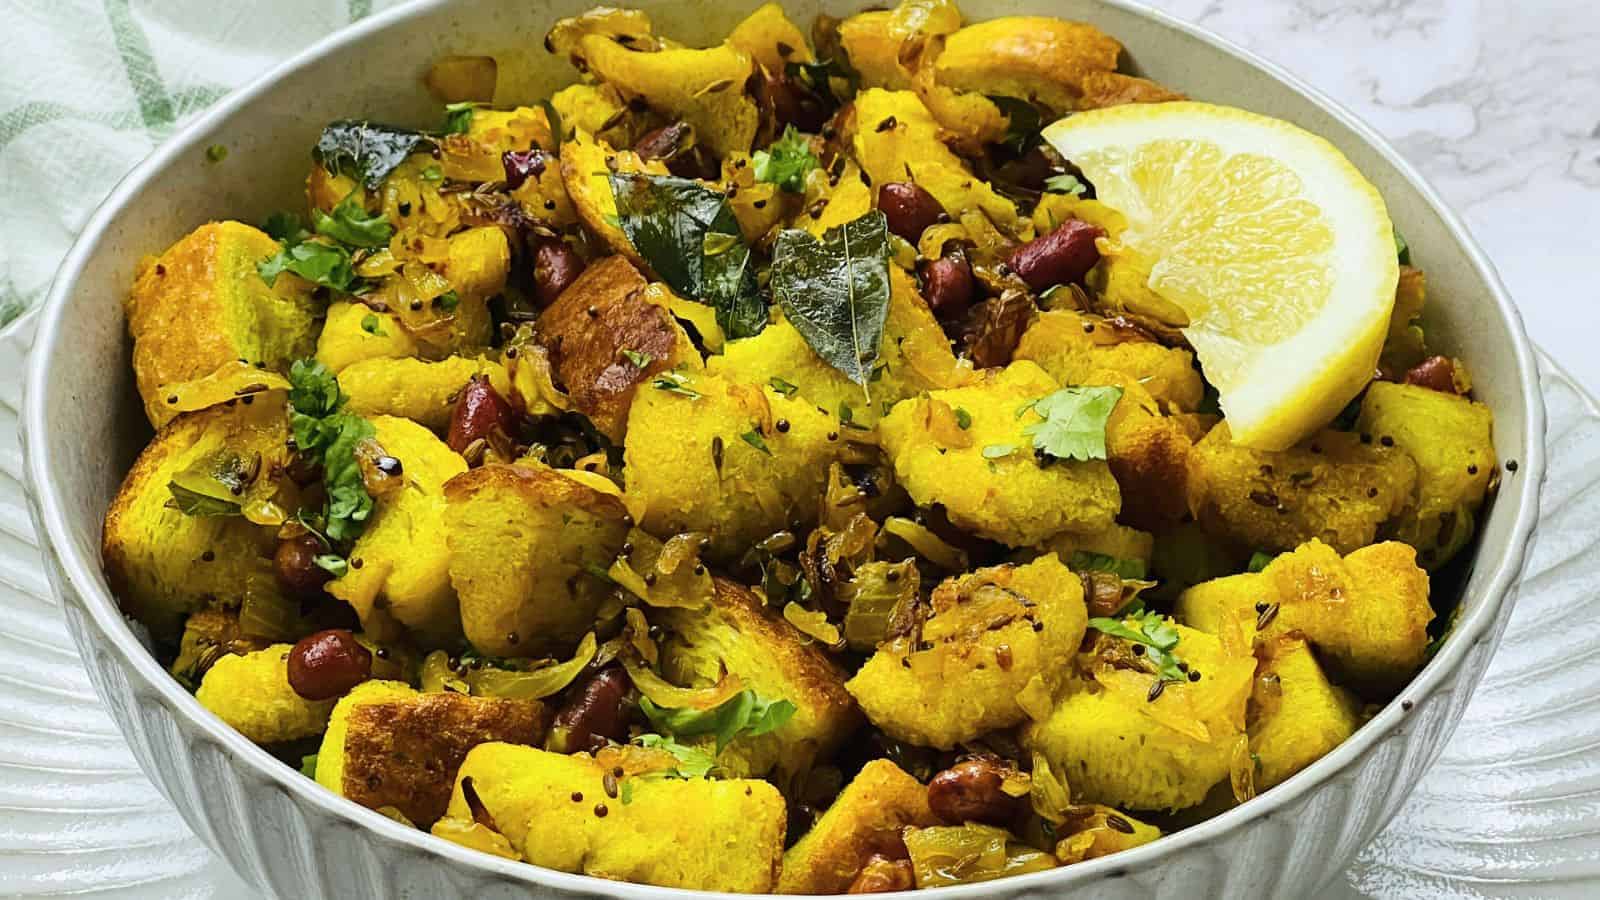 A bowl of Bread Upma with fried potatoes, spices, herbs, and lemon wedges.